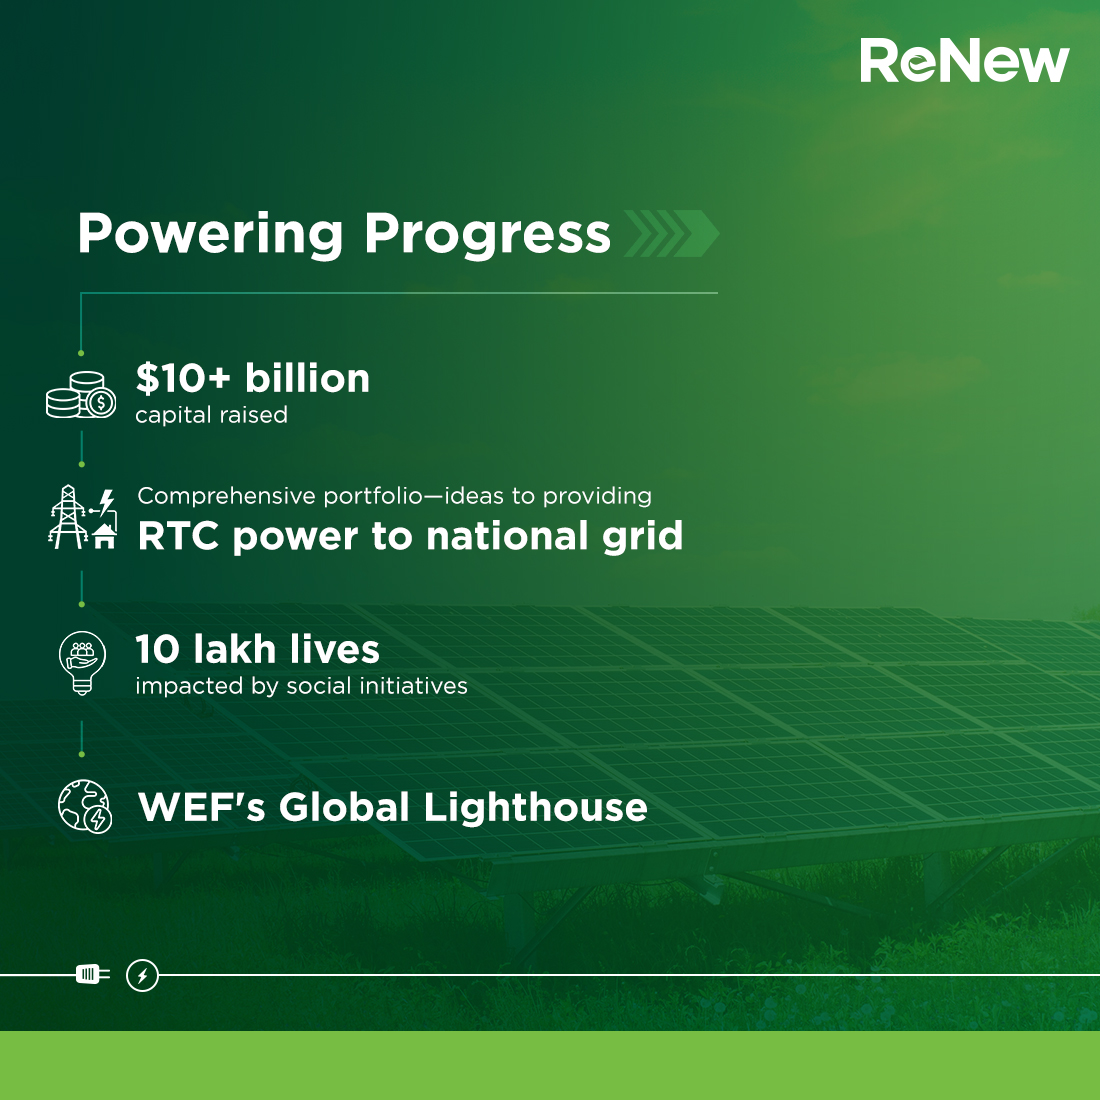 Predicated on addressing 21st century challenges of global warming, universal access to clean and affordable energy—ReNew remains committed to creating an equitable and progressive world. As we cross the 10 GW mark, we reflect on a journey that is unique, rooted in scientific…